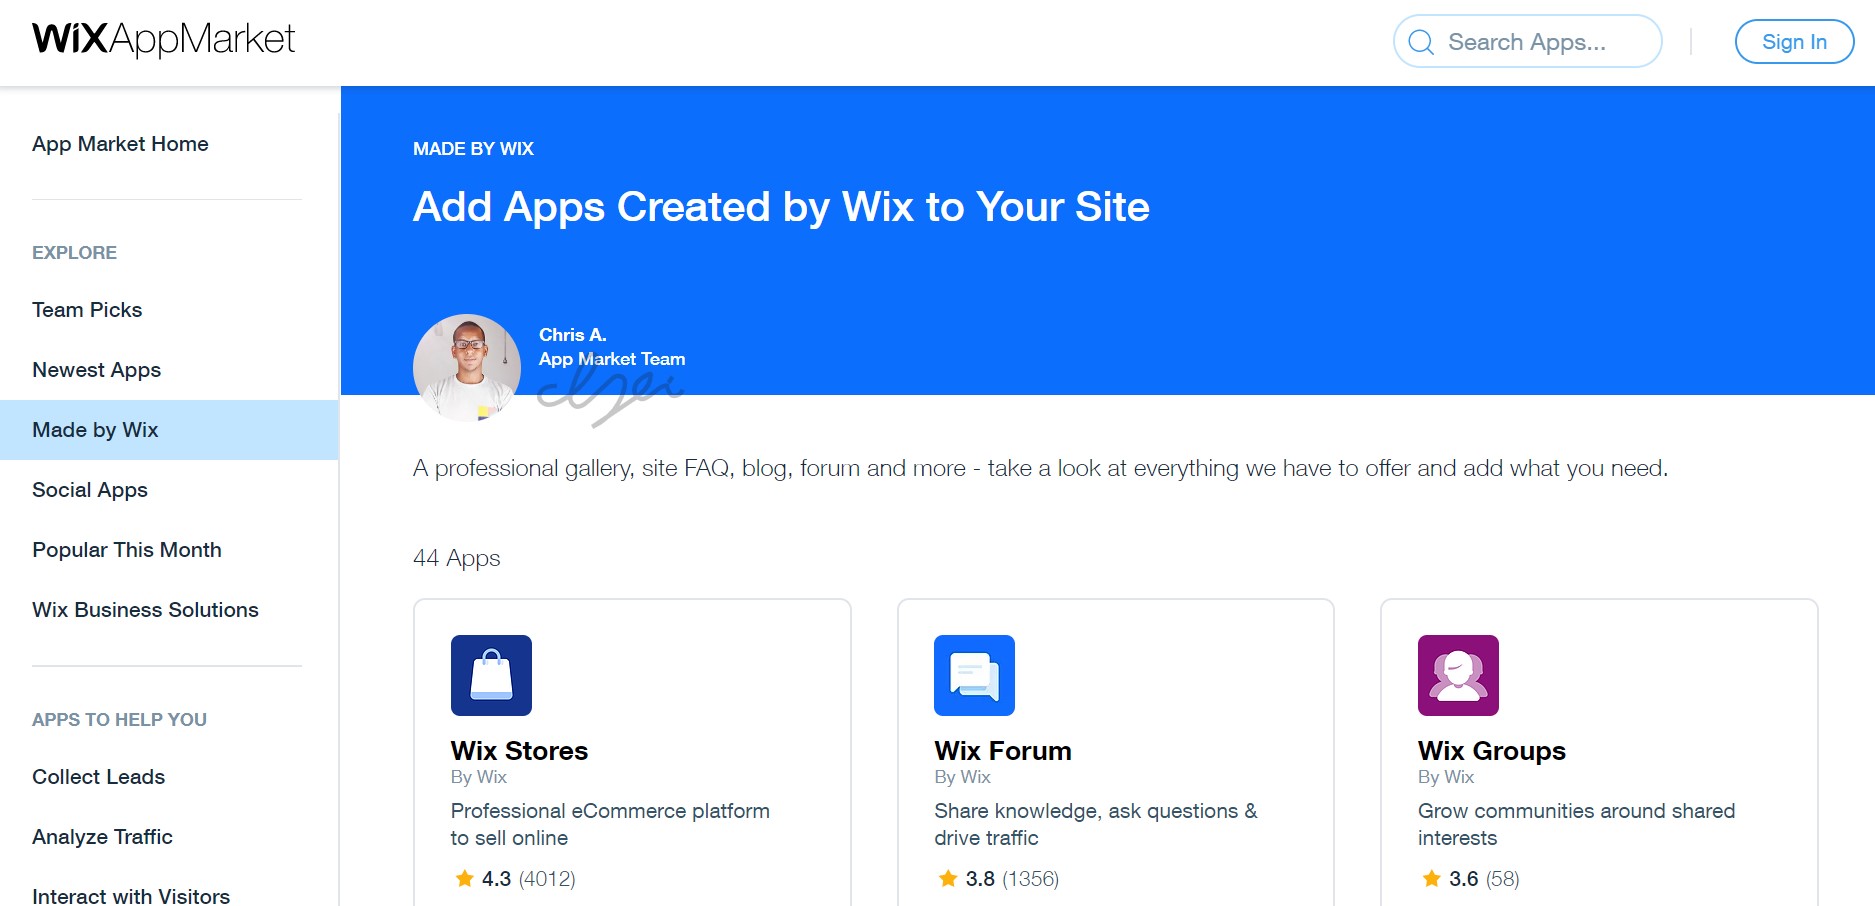 Top Free Apps for Wix From the App Market - iDevie